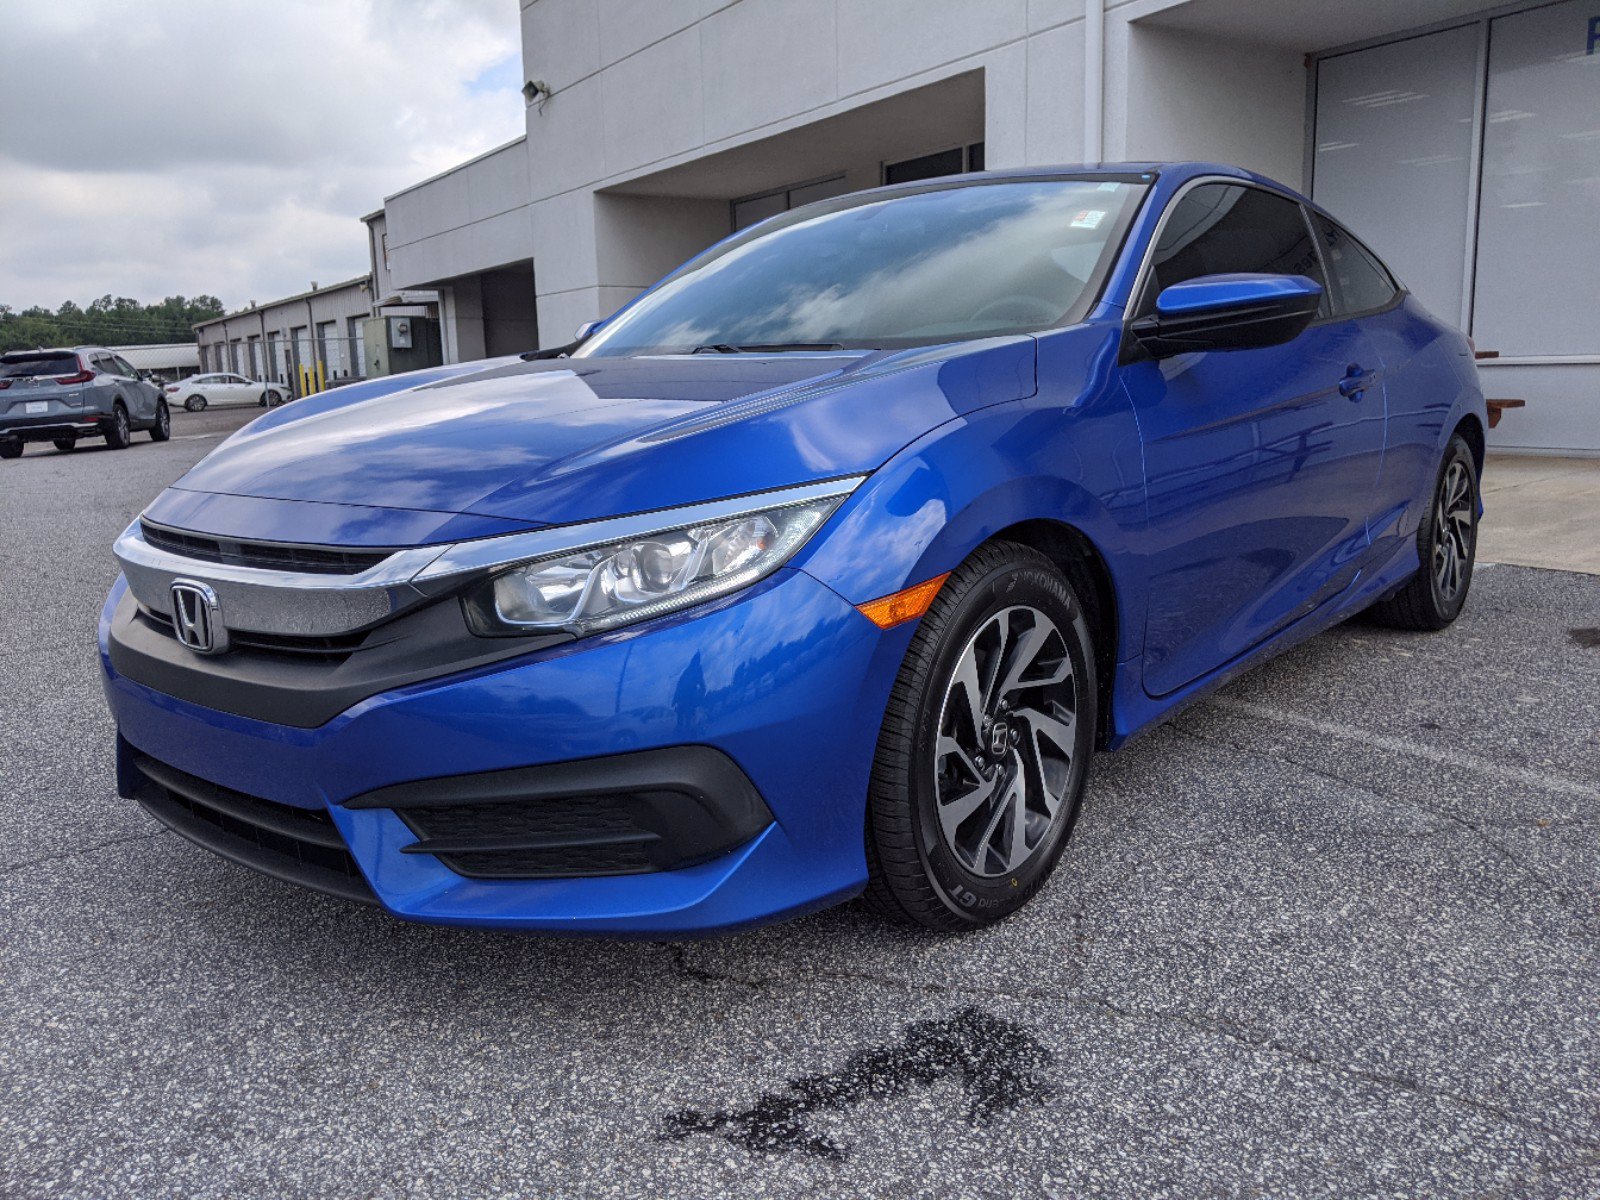 PreOwned 2017 Honda Civic Coupe LXP 2dr Car in Athens 